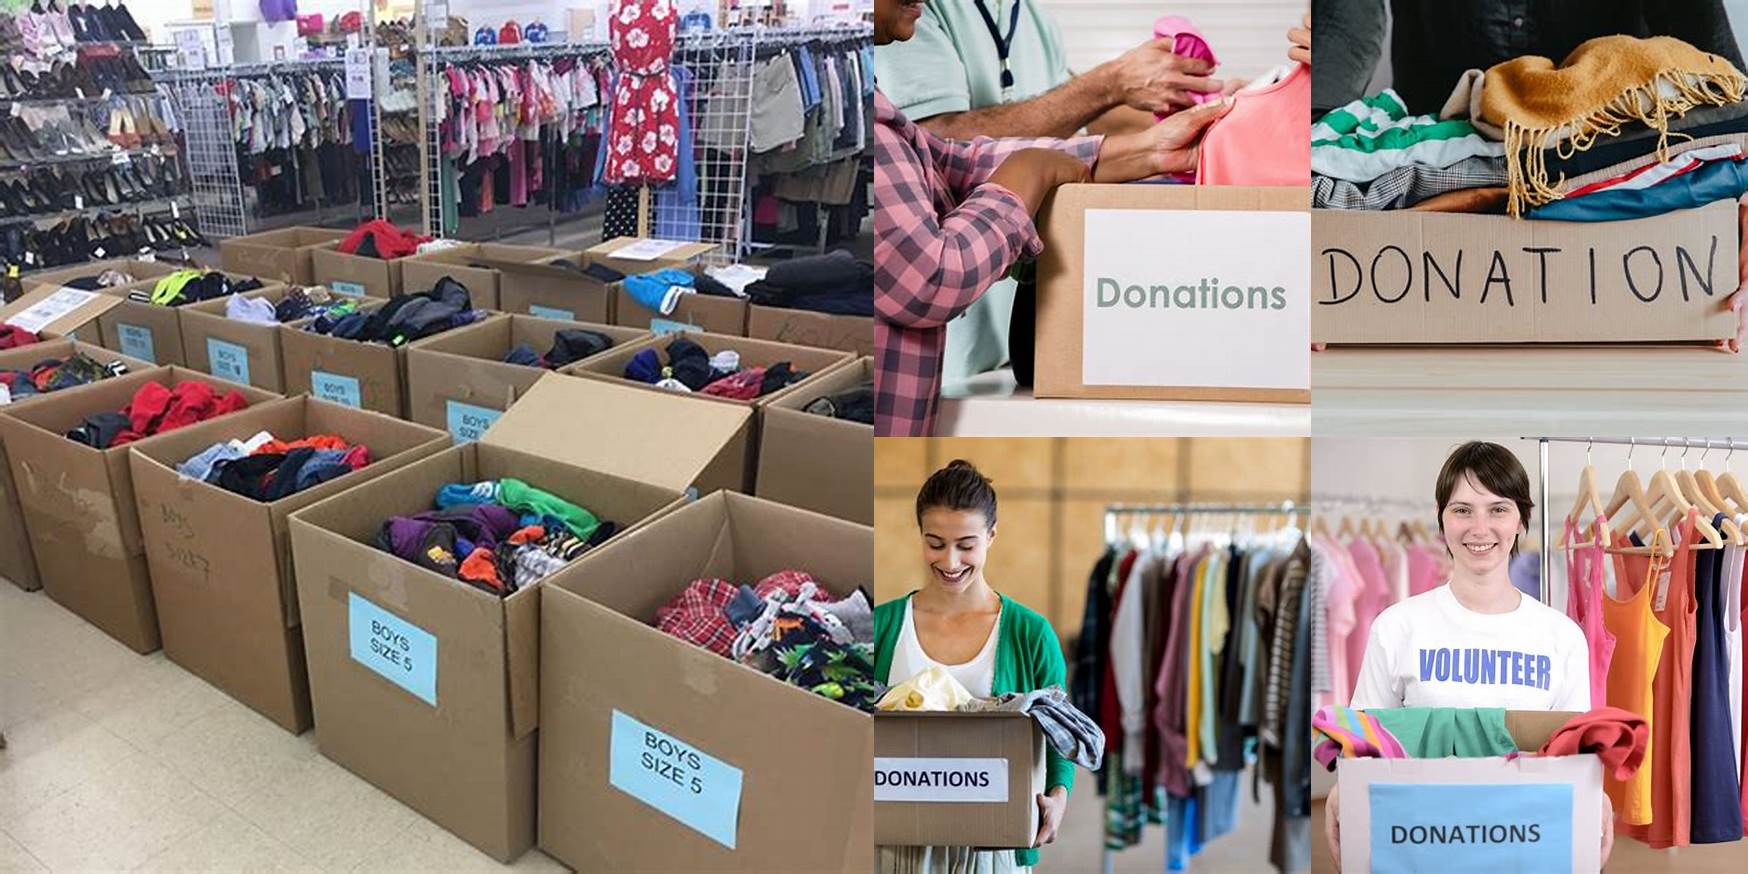 Where To Donate Clothes In Tampa